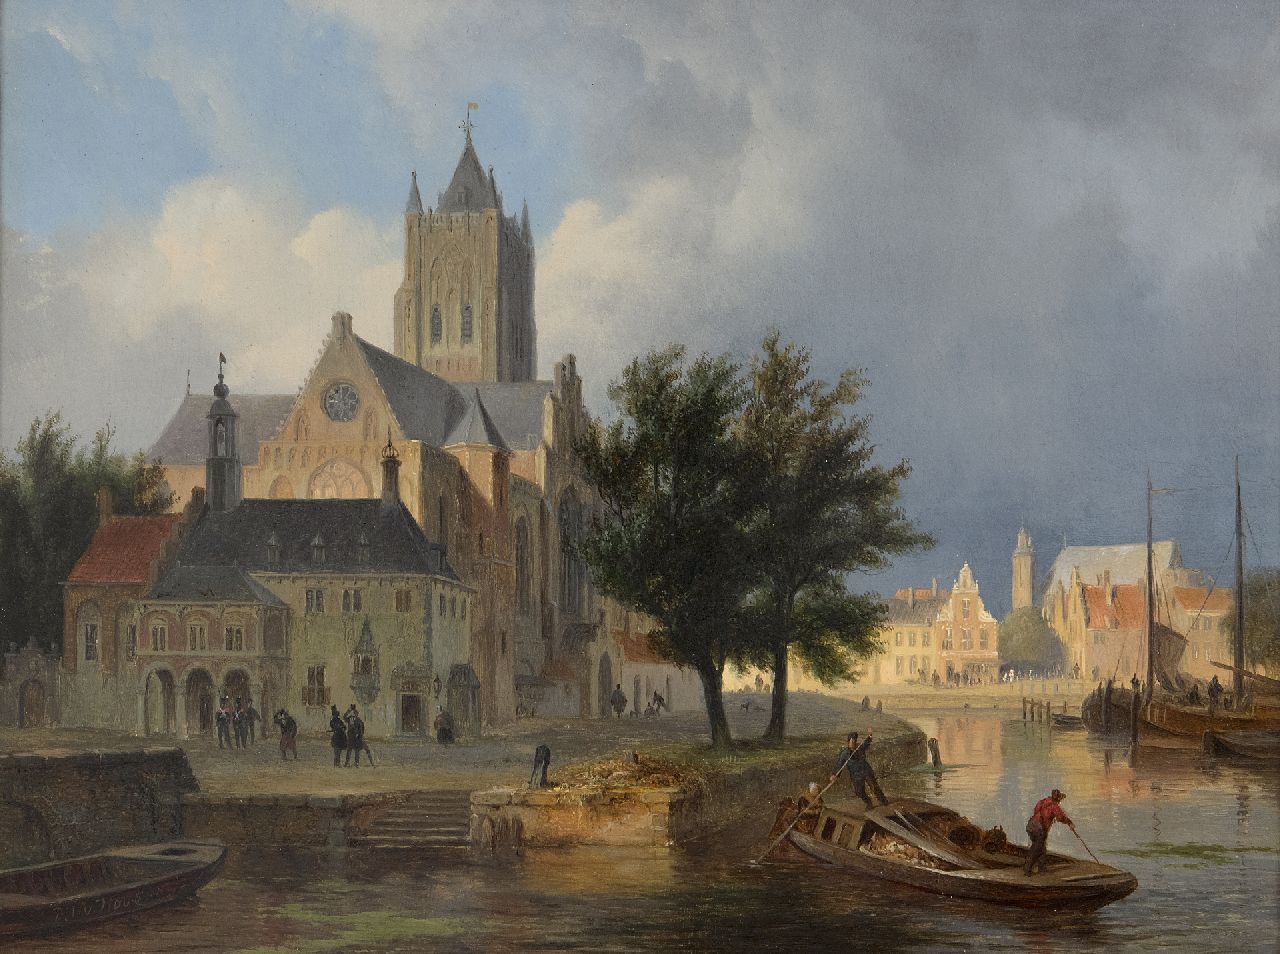 Bart van Hove | A capriccio town view, possibly Gorinchem, oil on panel, 28.8 x 38.0 cm, signed l.r.